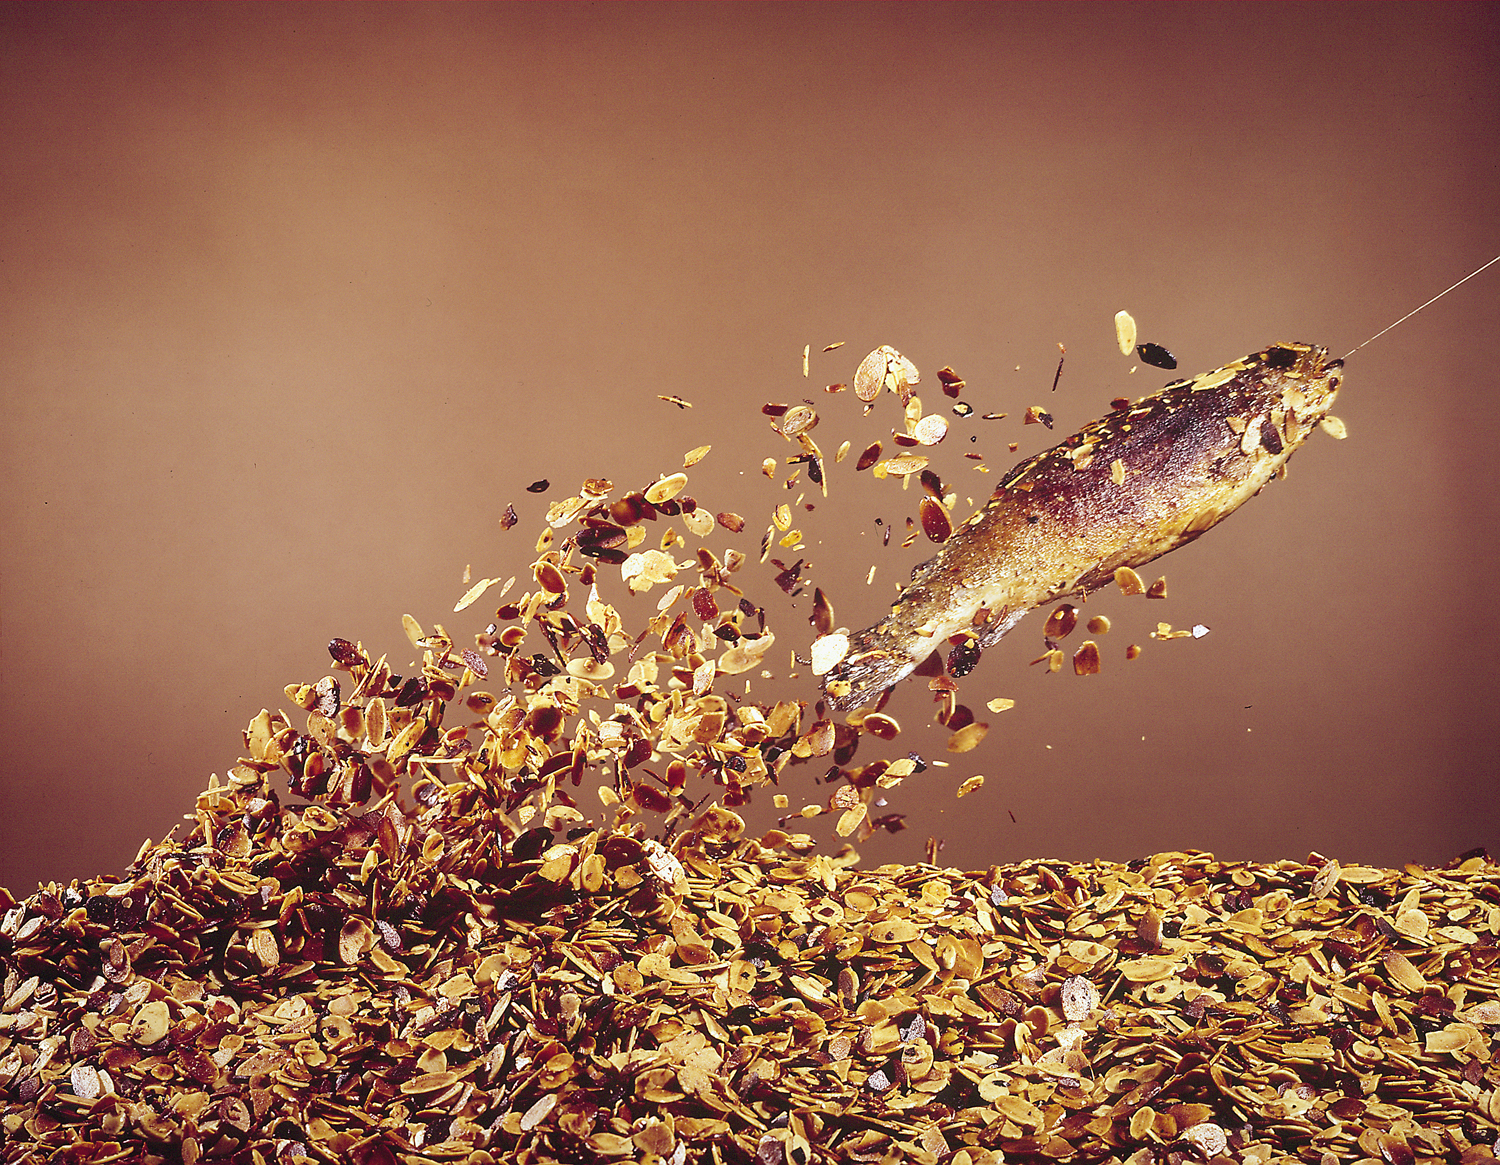 A hooked trout "flies" from a bed of almonds in preparation for Trout Amandine.